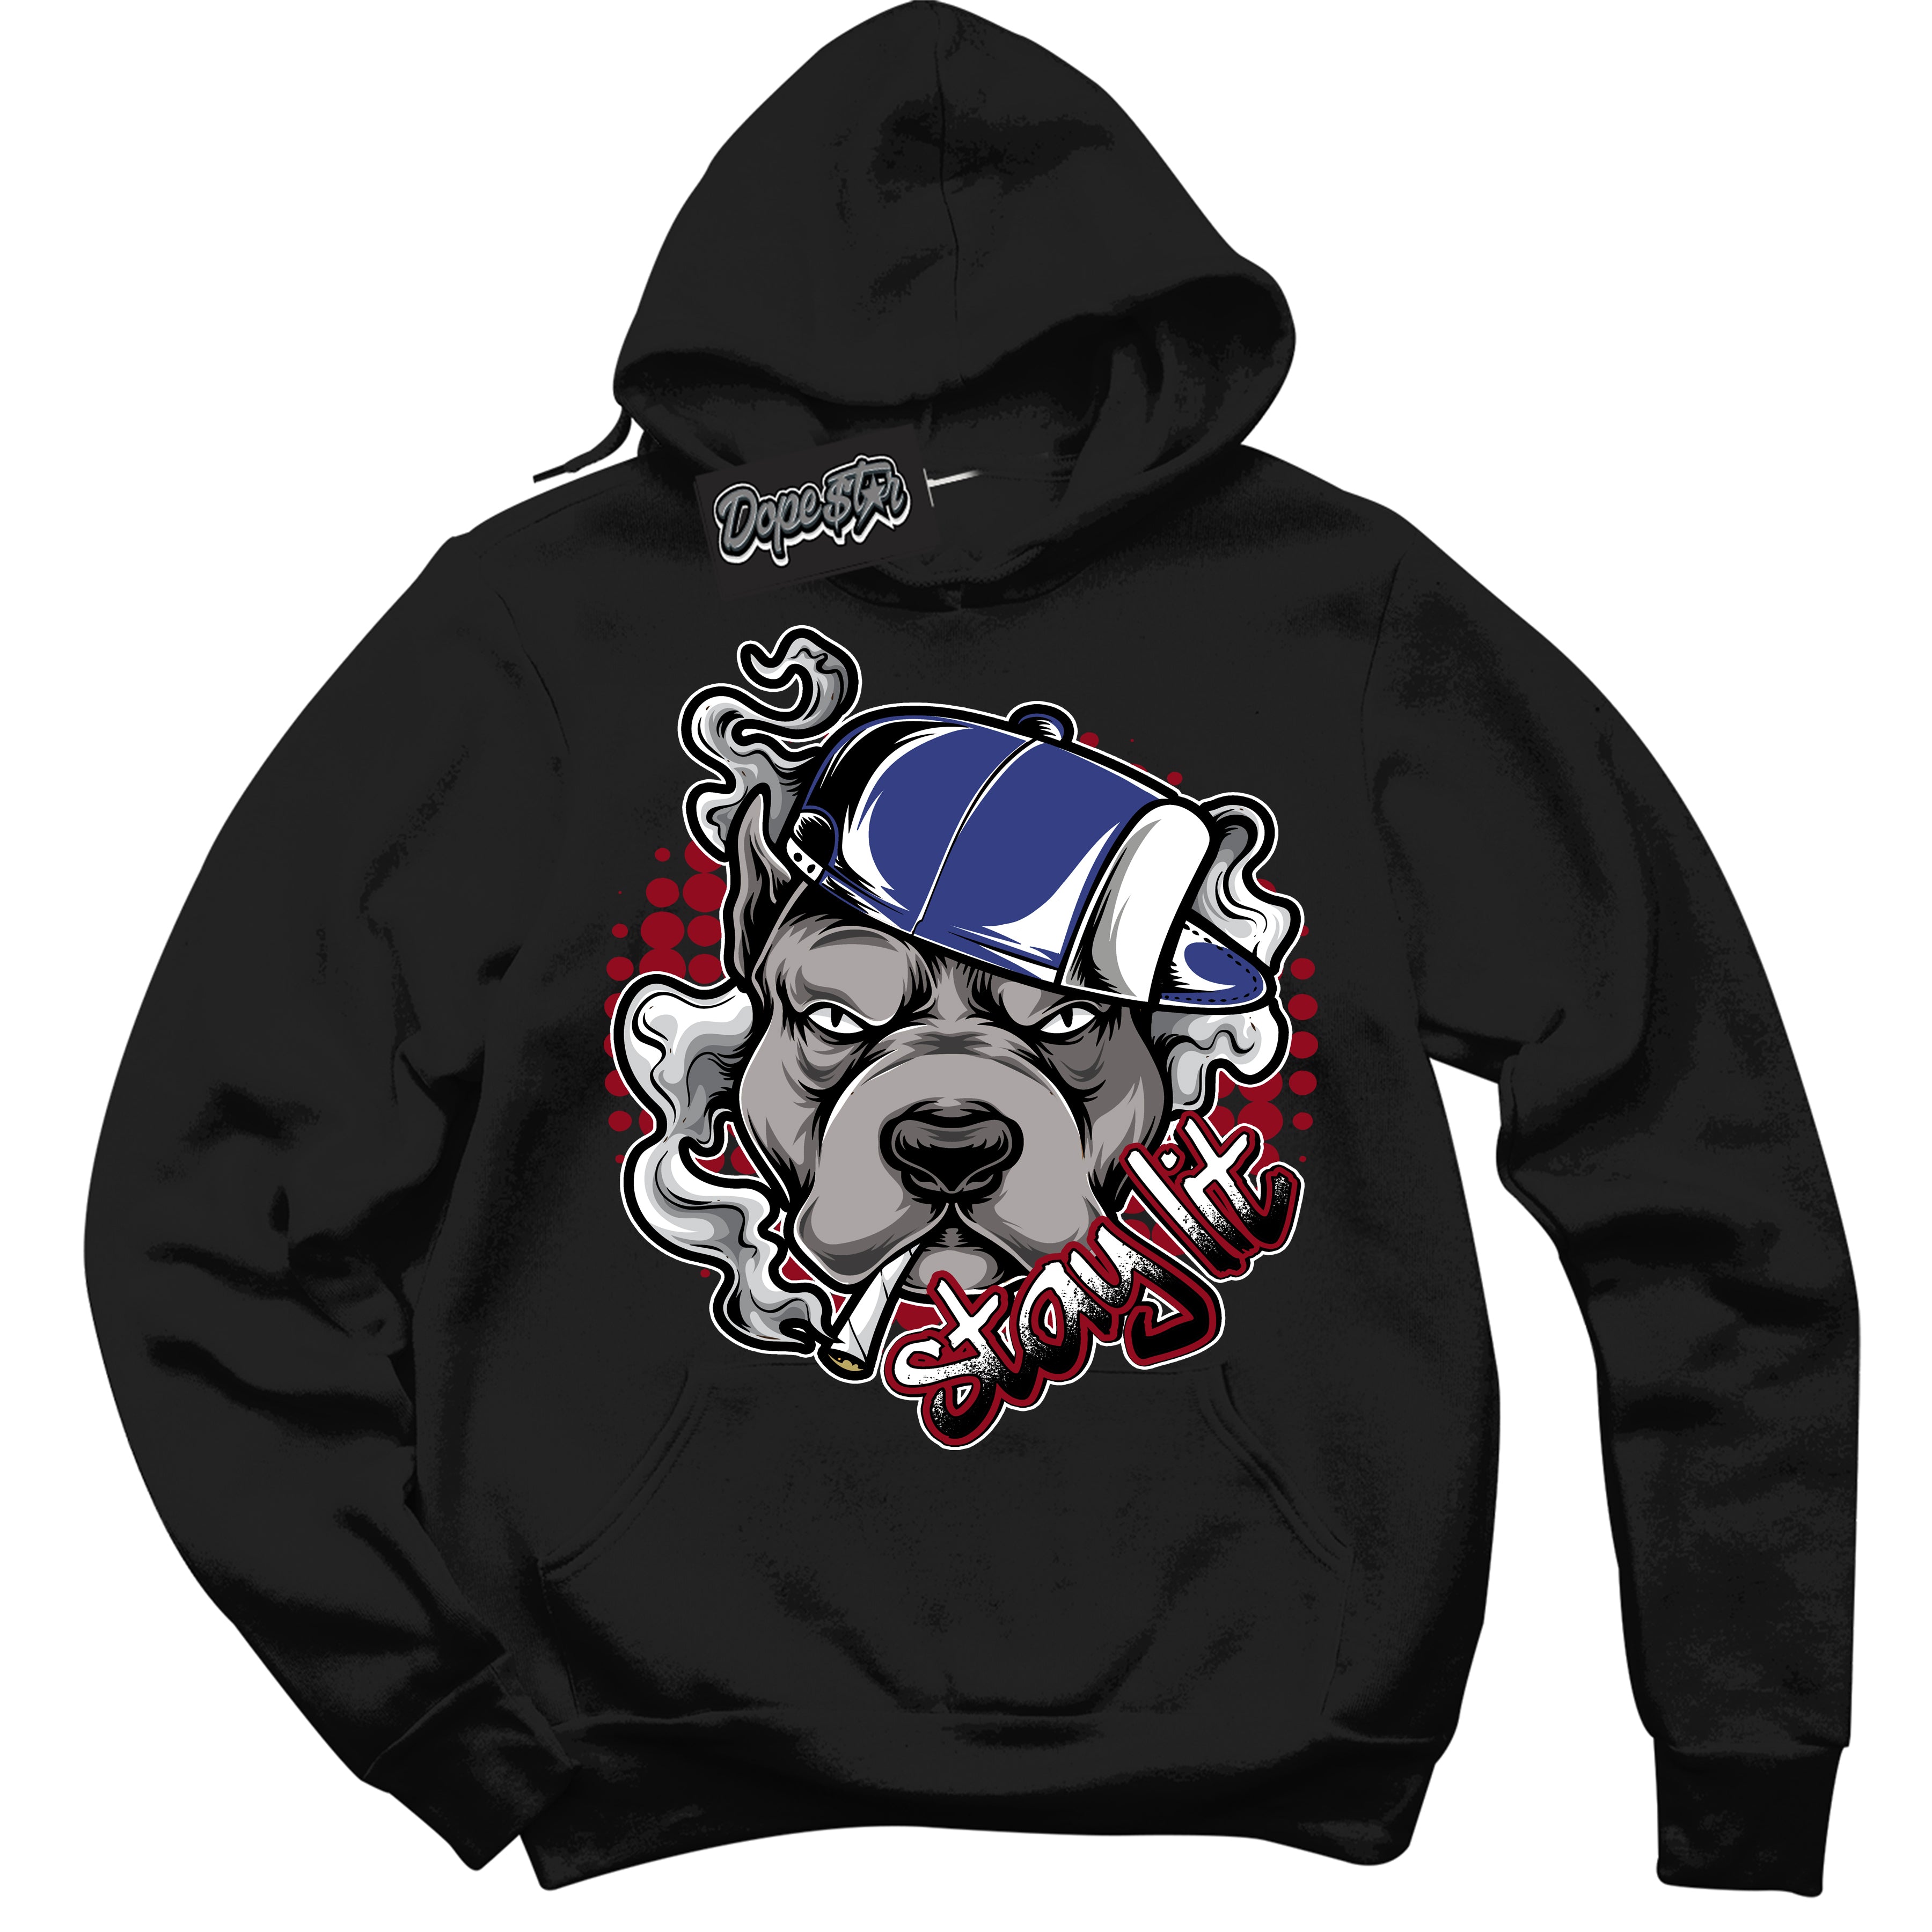 Cool Black Hoodie with “ Stay Lit ”  design that Perfectly Matches Playoffs 8s Sneakers.